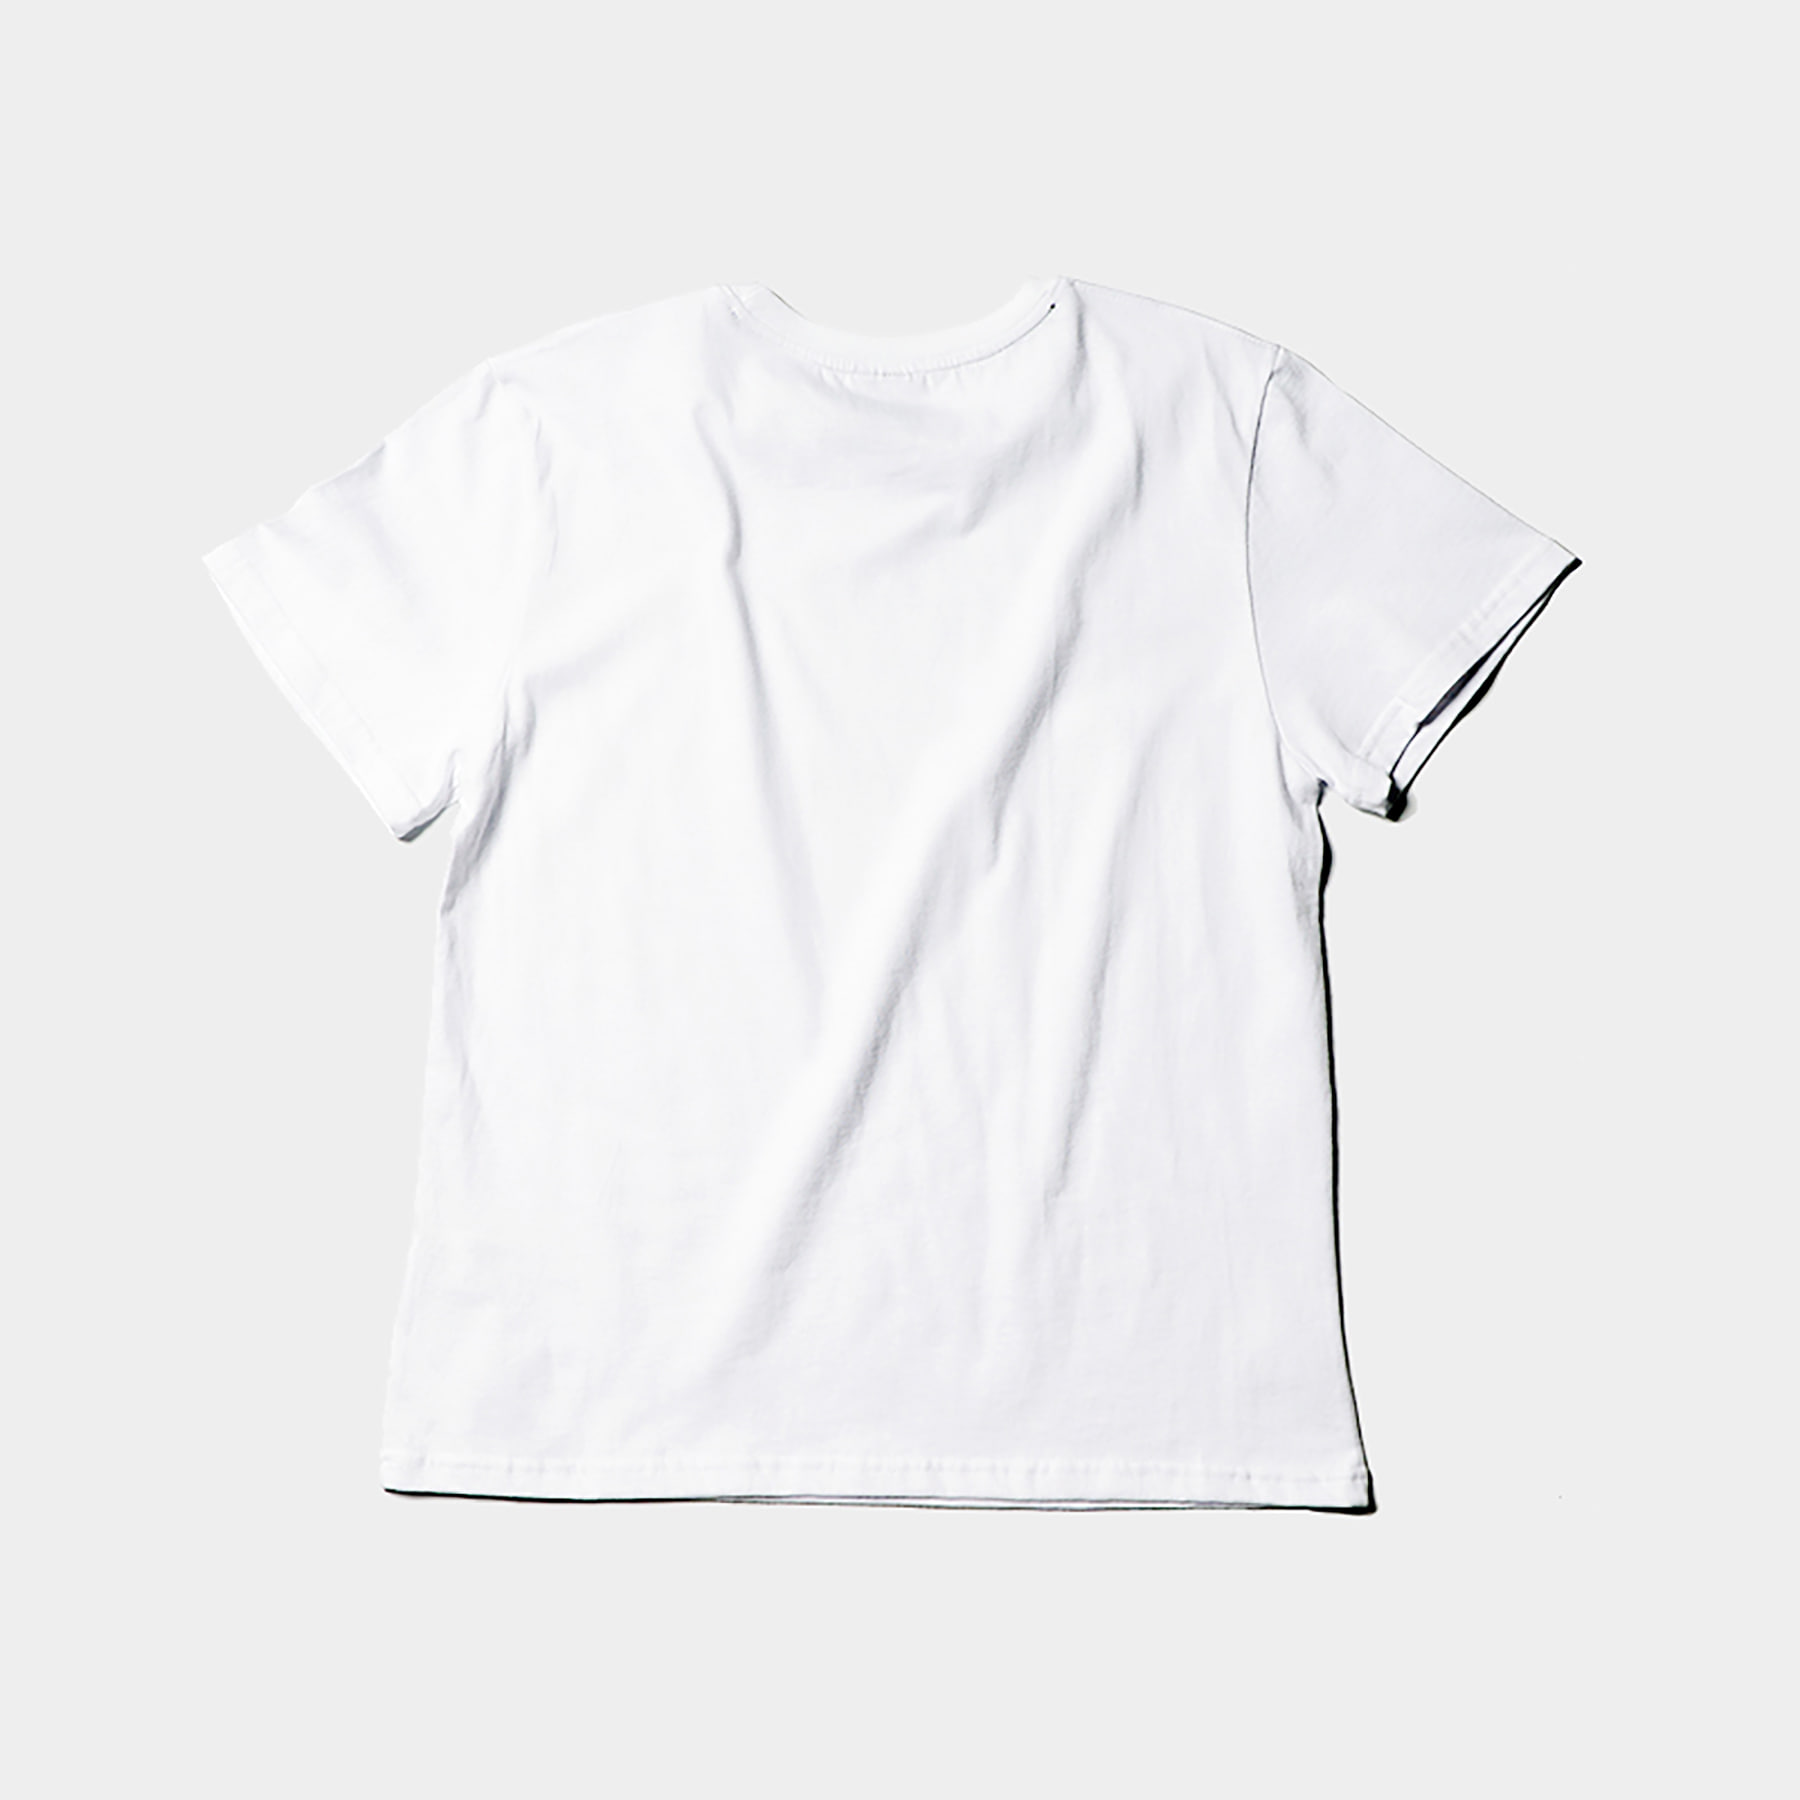 Twinkle point t-shirt (White)